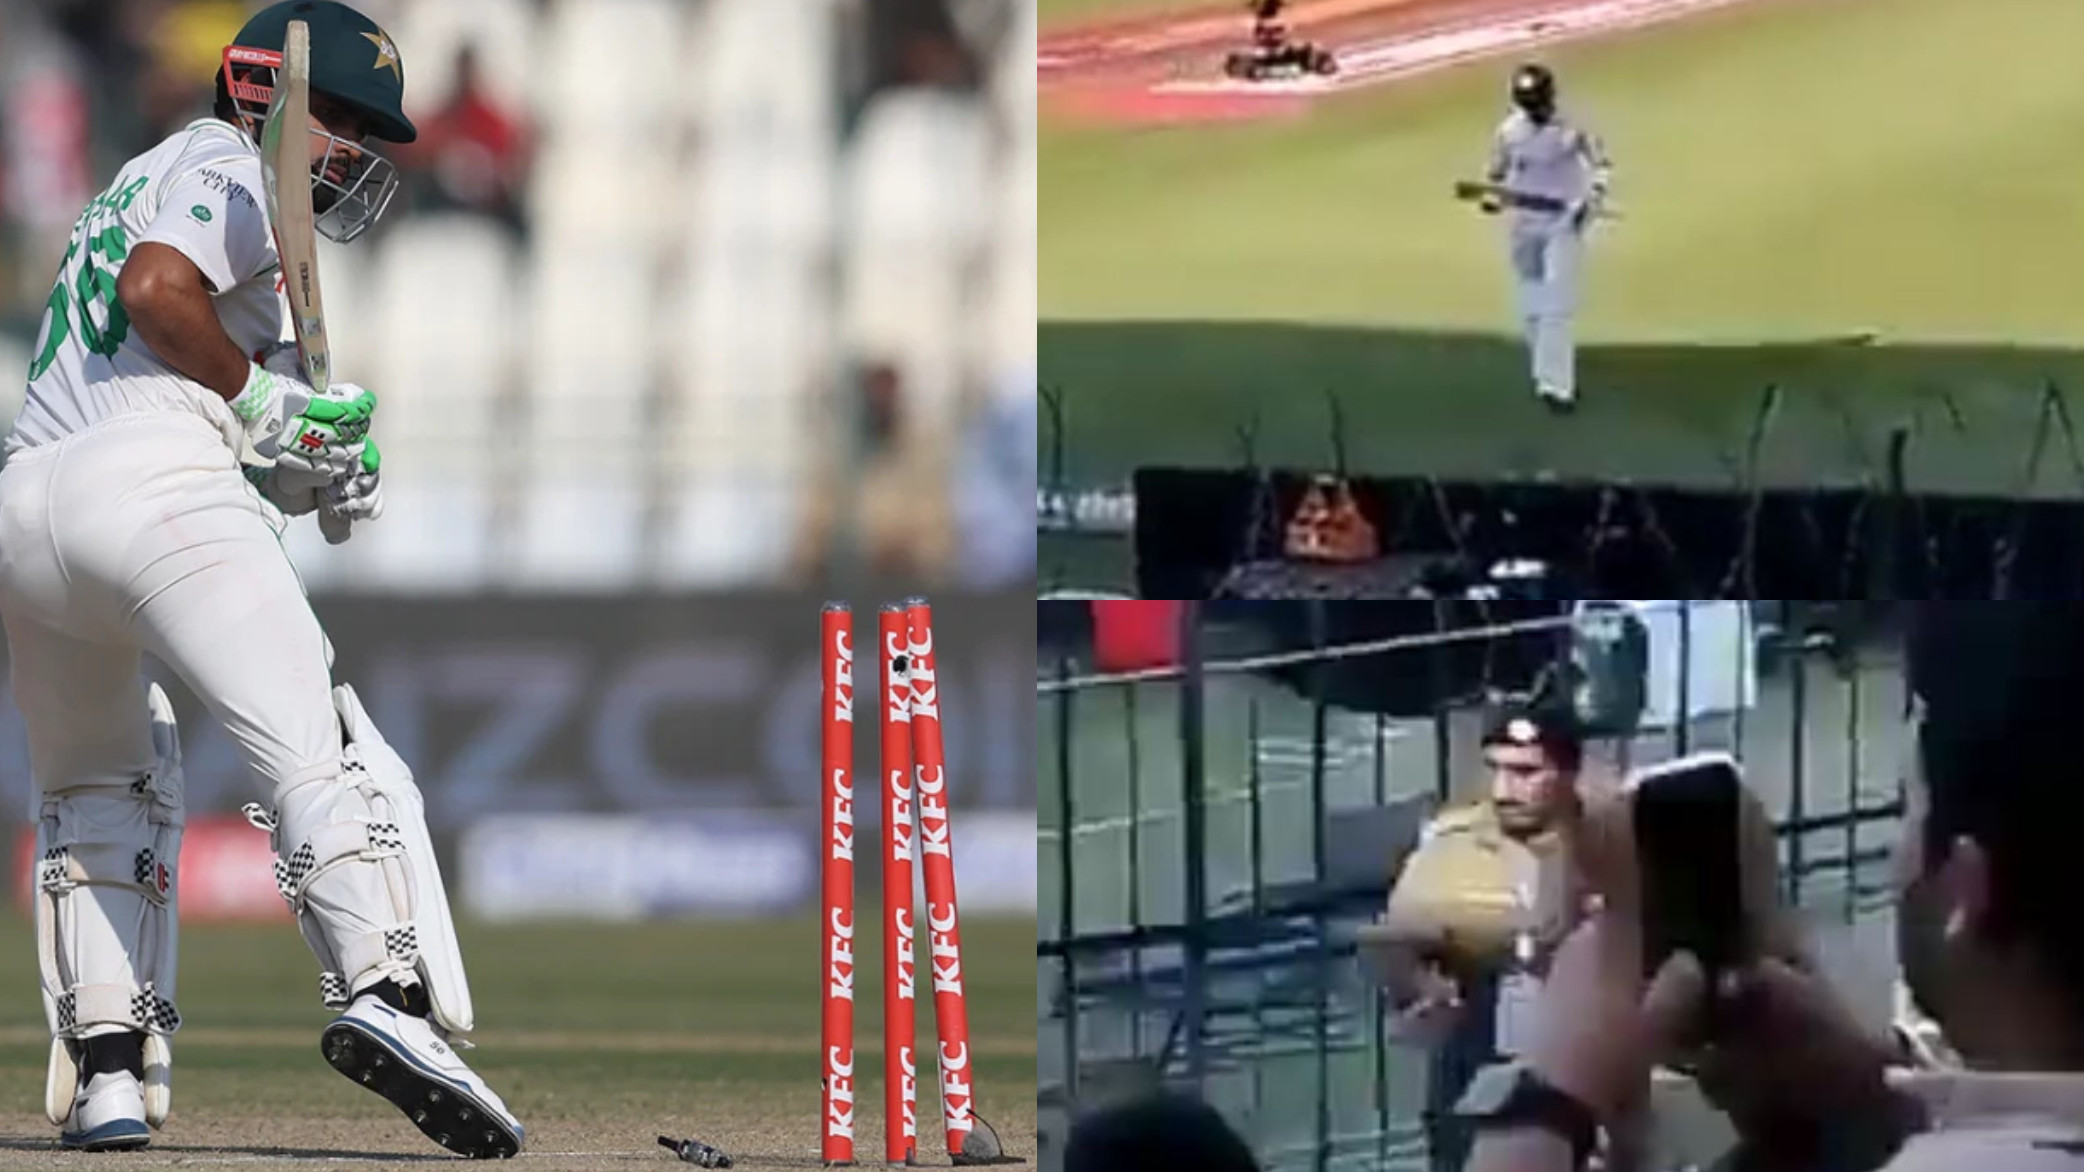 PAK v ENG 2022: WATCH- Babar Azam booed with 'ZimBabar' chants by crowd after dismissal in 2nd Test in Multan